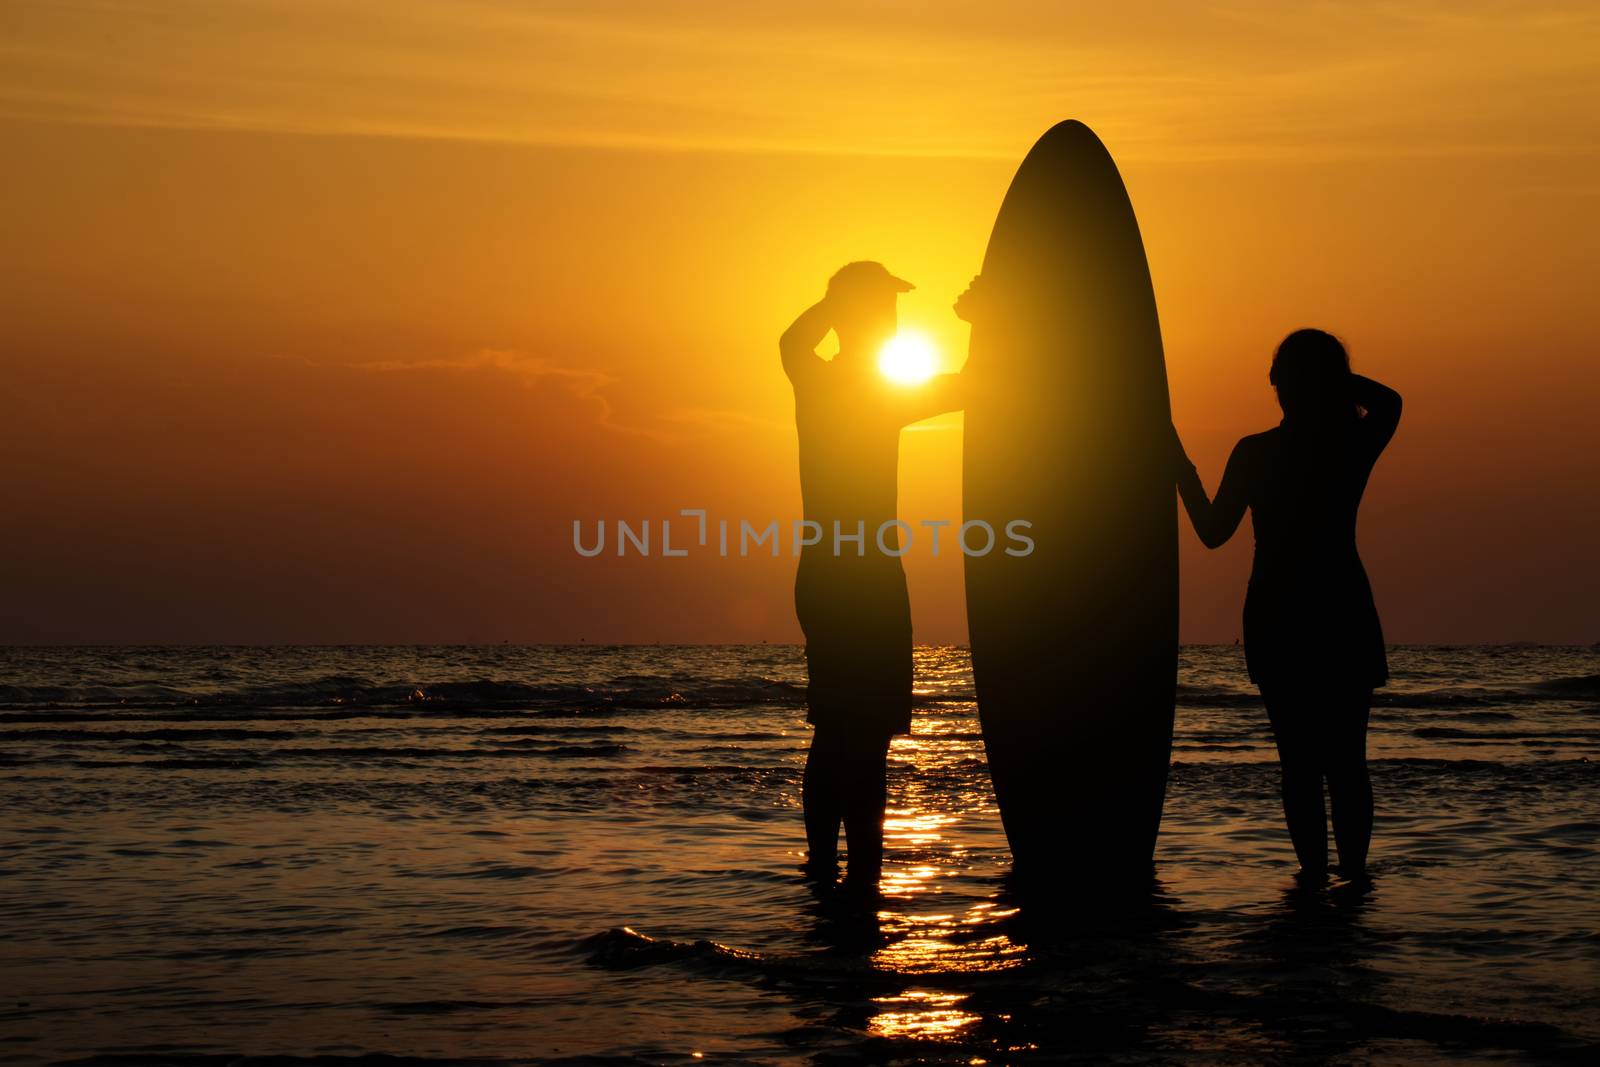 Man and girl with surfboard on the beach at sunset by asiandelight